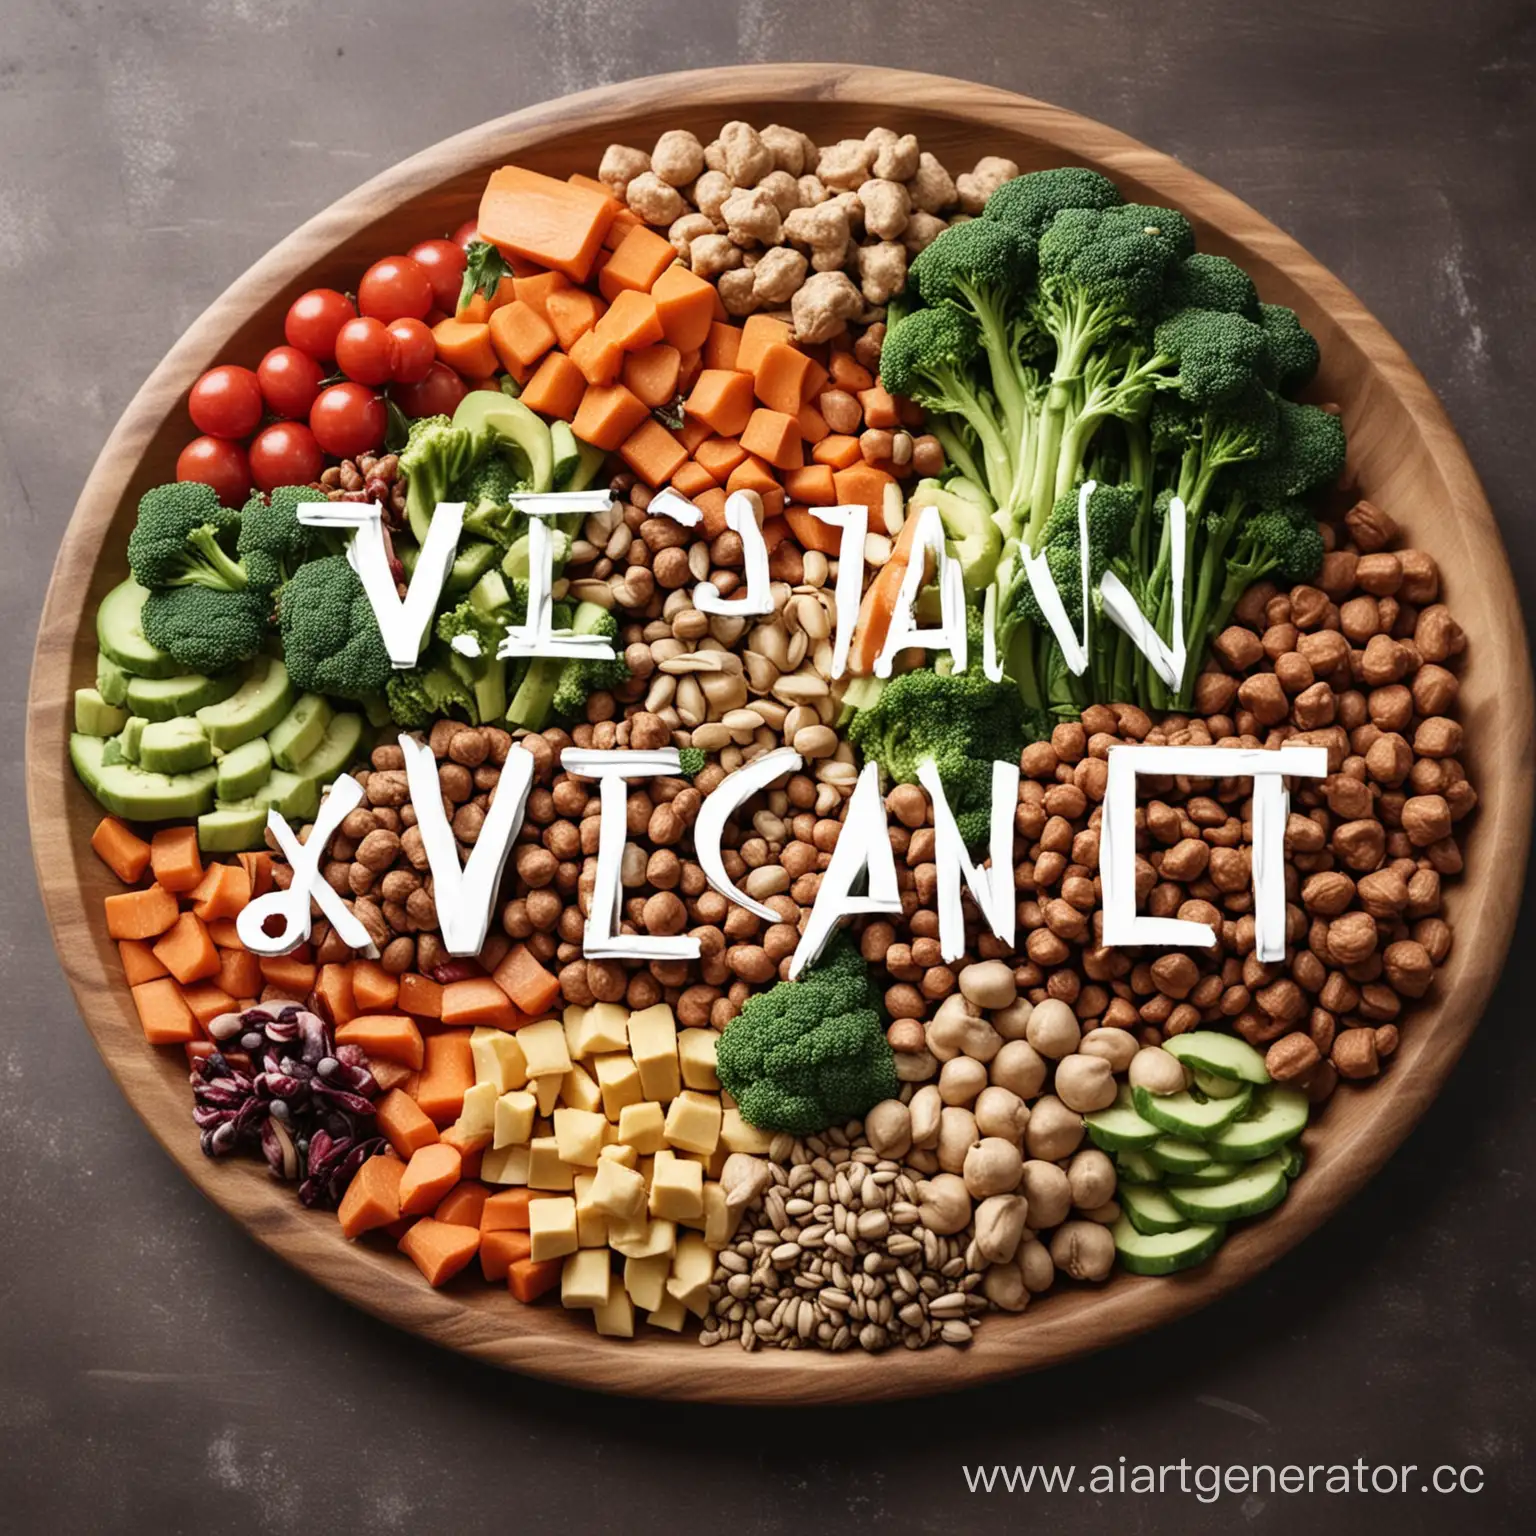 Healthy-Vegan-Diet-with-Colorful-PlantBased-Foods